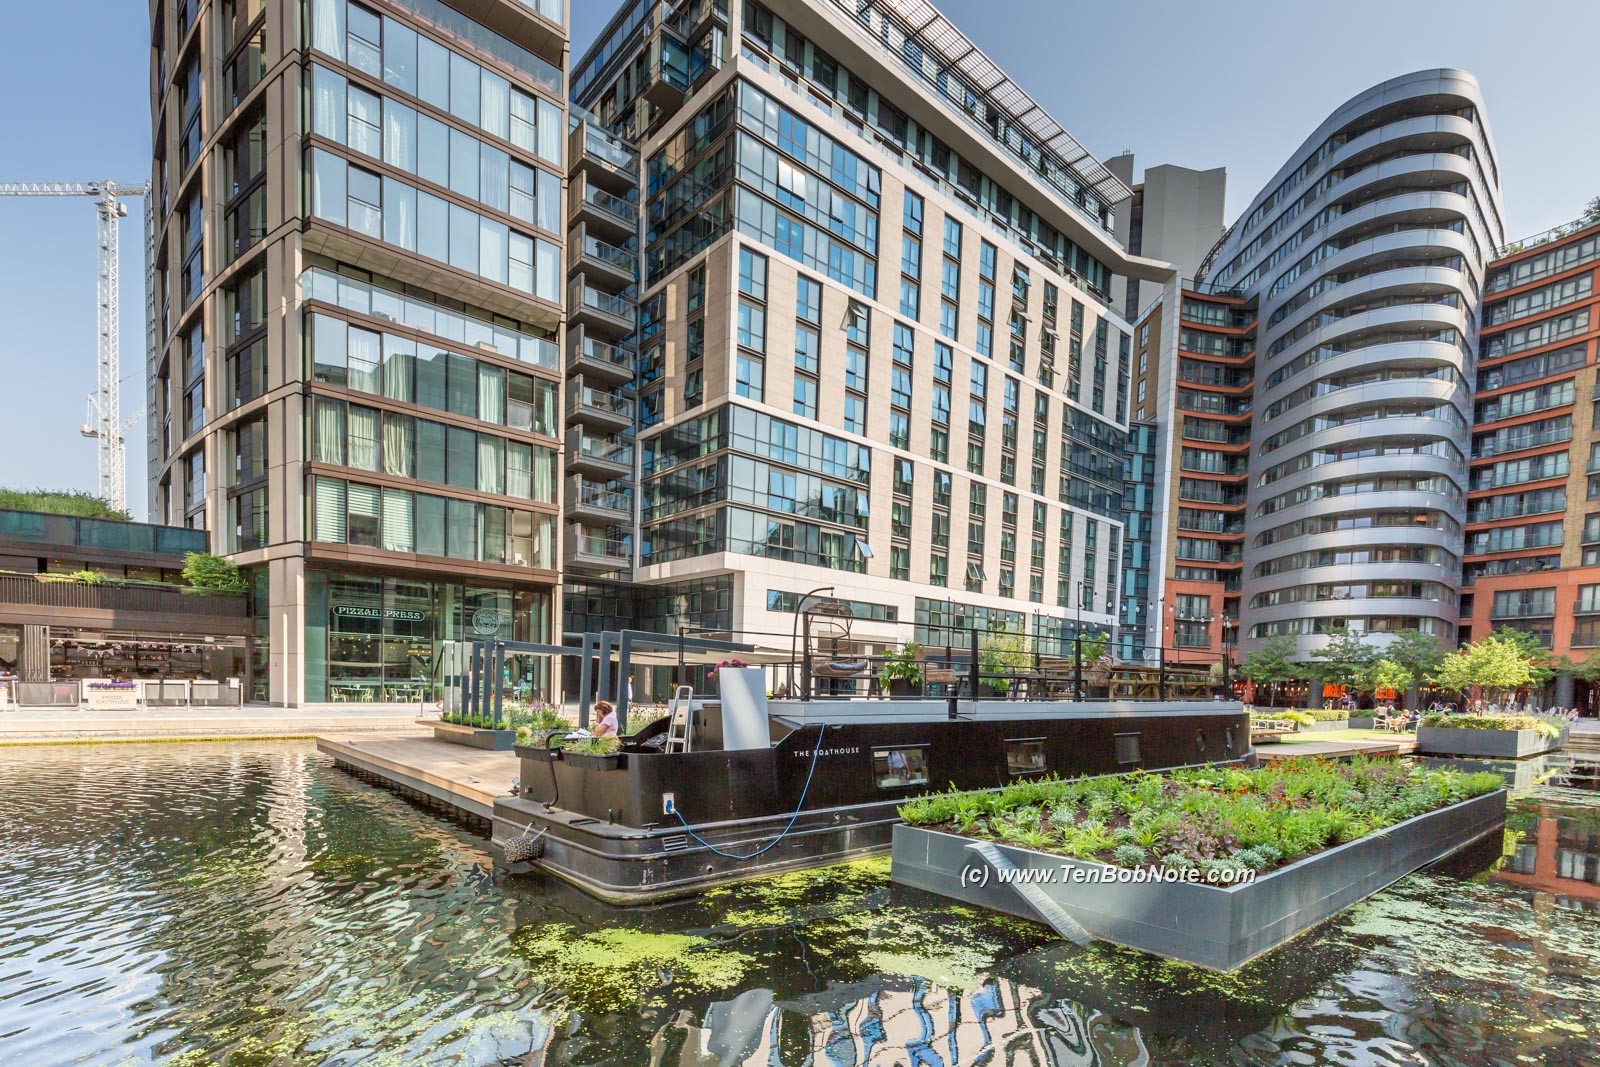 Photo Image Of: New Boat added as a feature in Paddington Basin